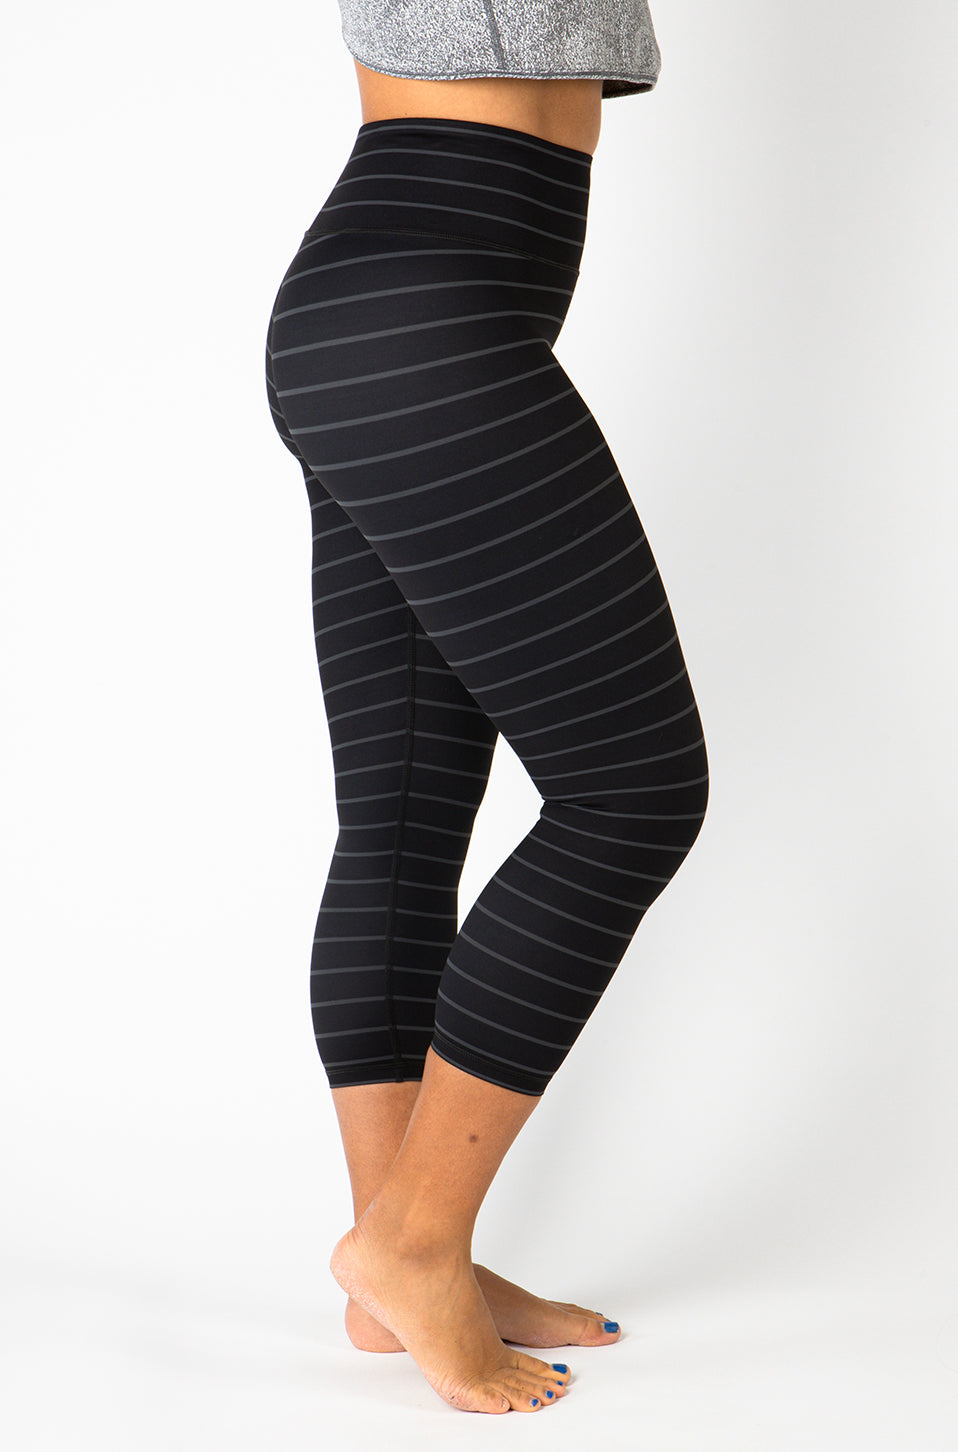 Striped Running Leggings Seamless High Stretch Tummy Control Workout Tights  | SHEIN IN